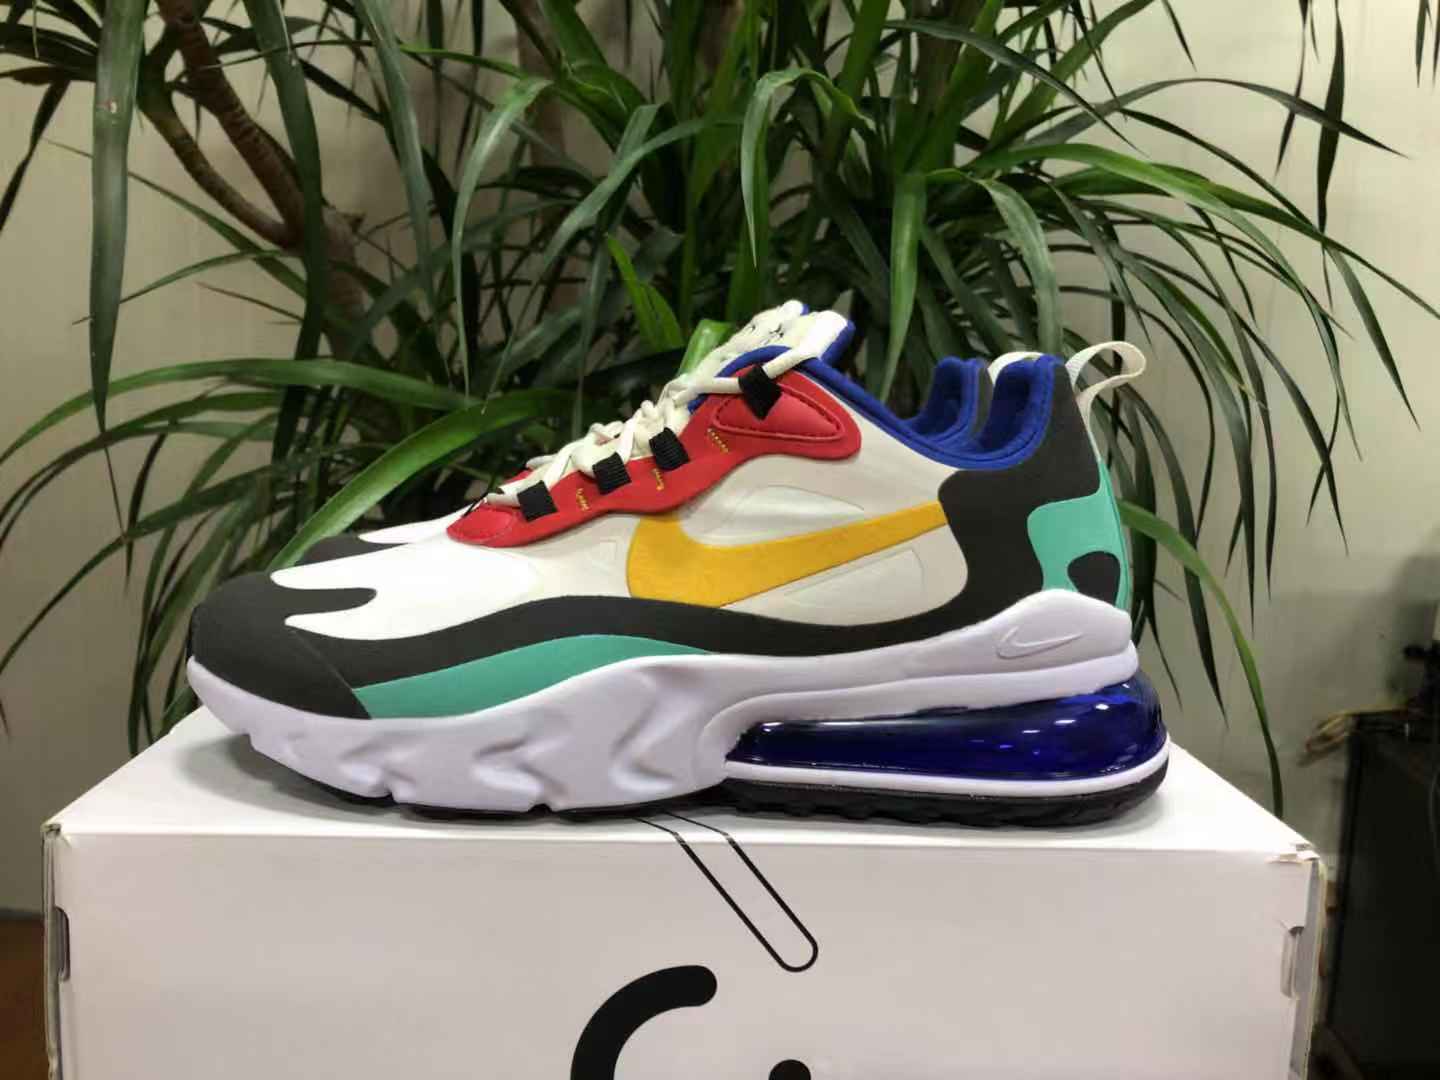 Men's Hot sale Running weapon Nike Air Max Shoes 063